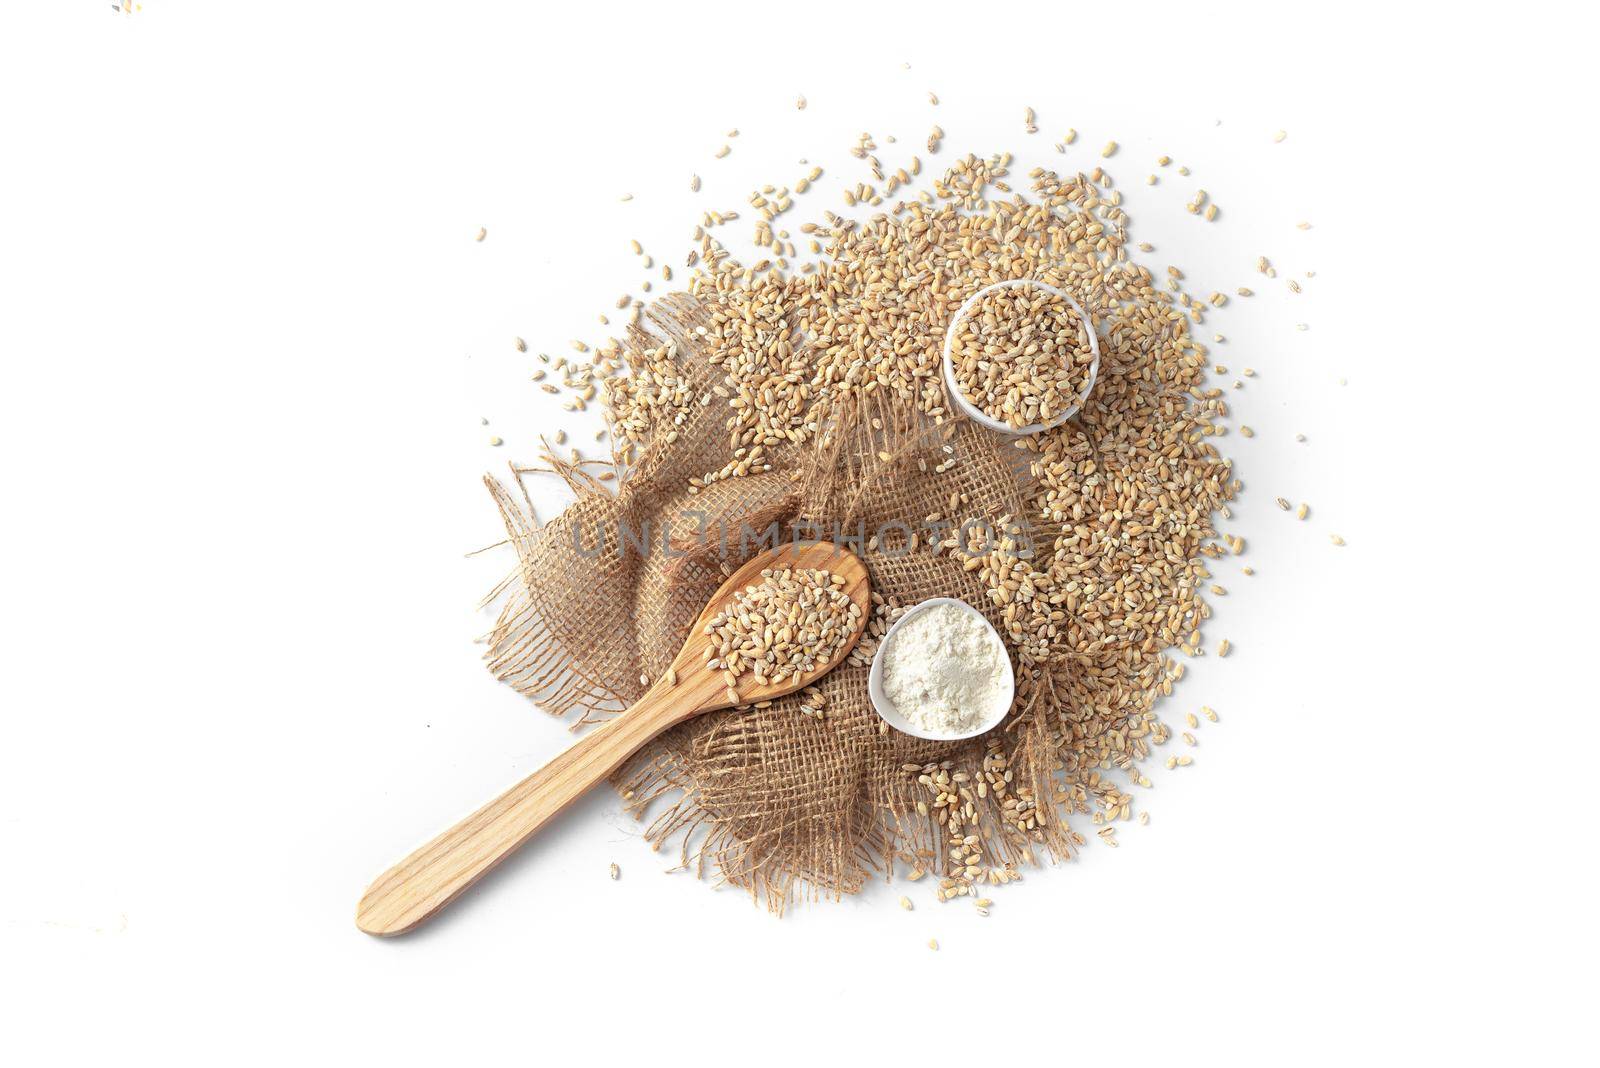 Whole wheat and barley seeds on white background with wooden spoon isolate. Top view by gulyaevstudio